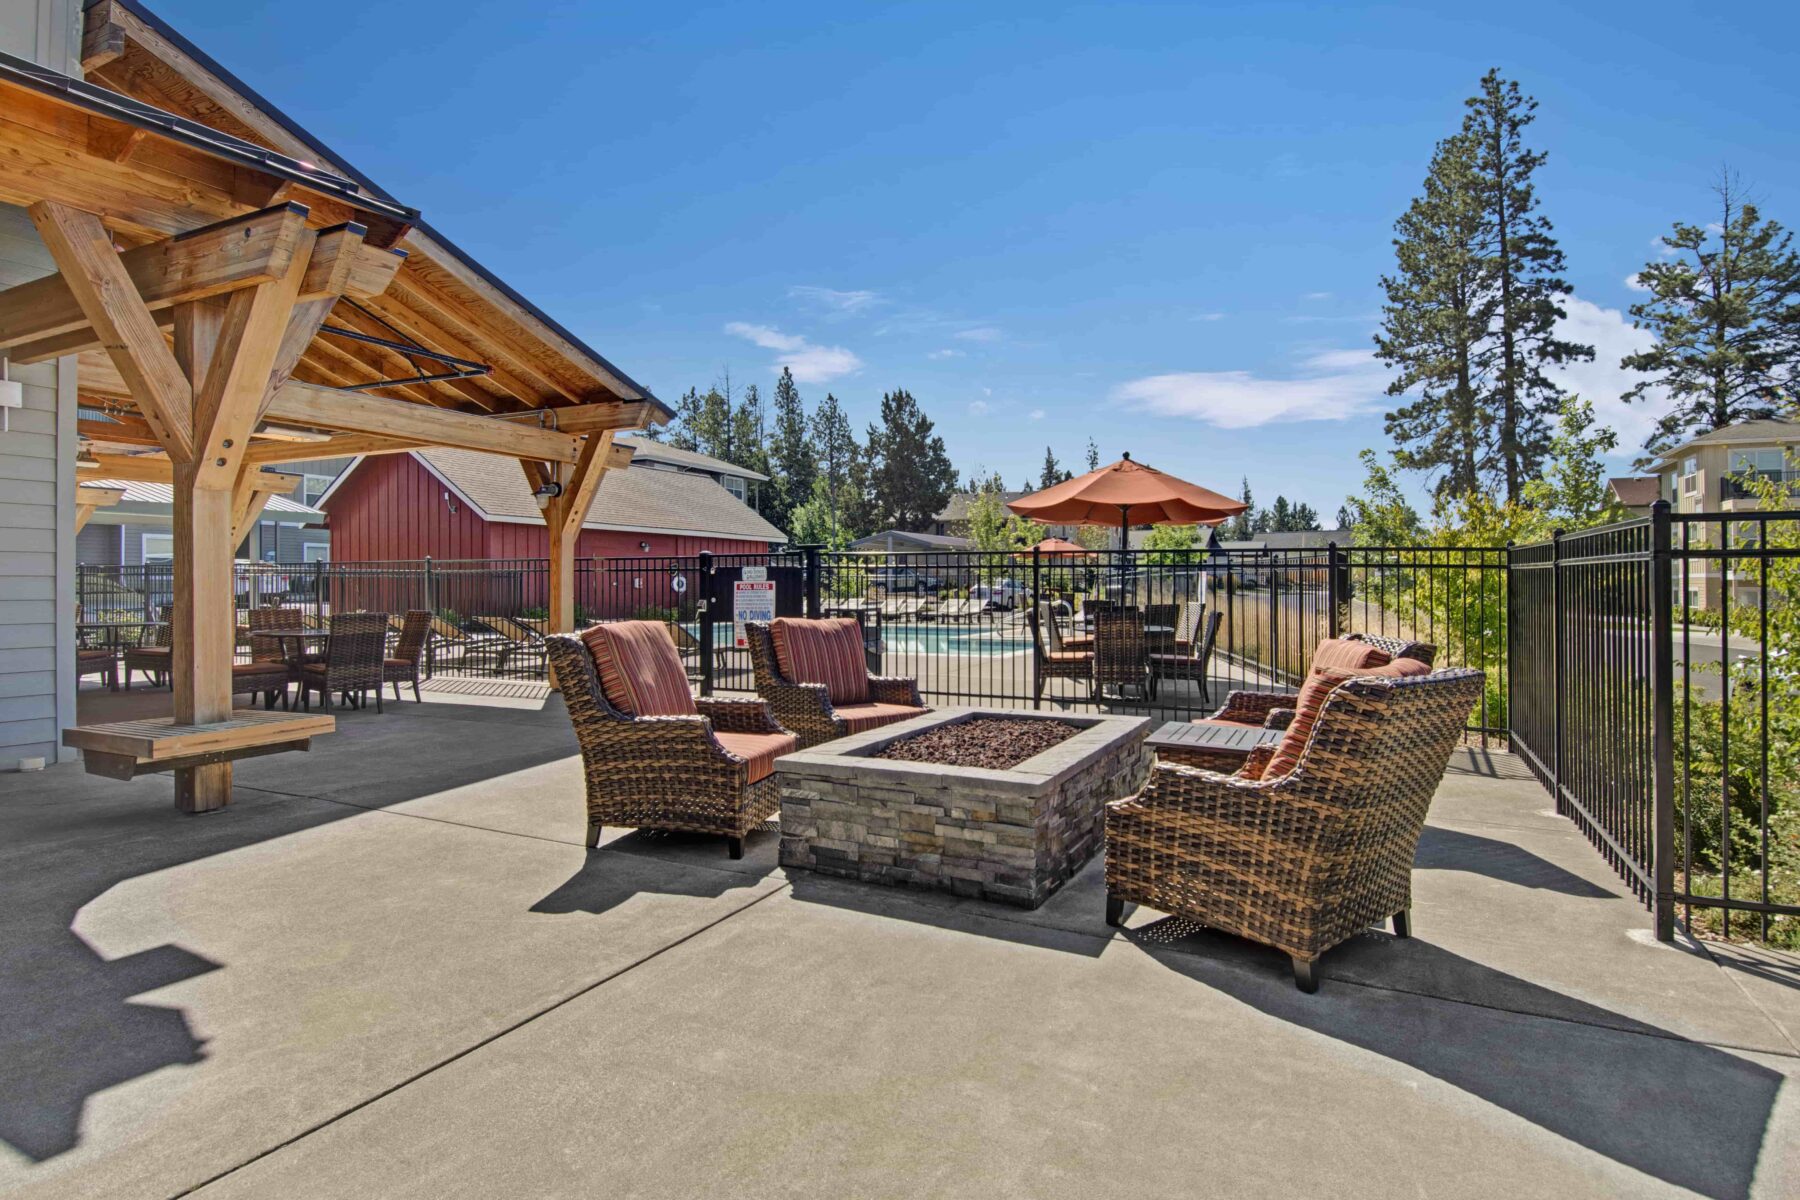 Outdoor patio with fire pit, wicker chairs, wooden pergola, red umbrella, picnic table, and red barn-like building in background.